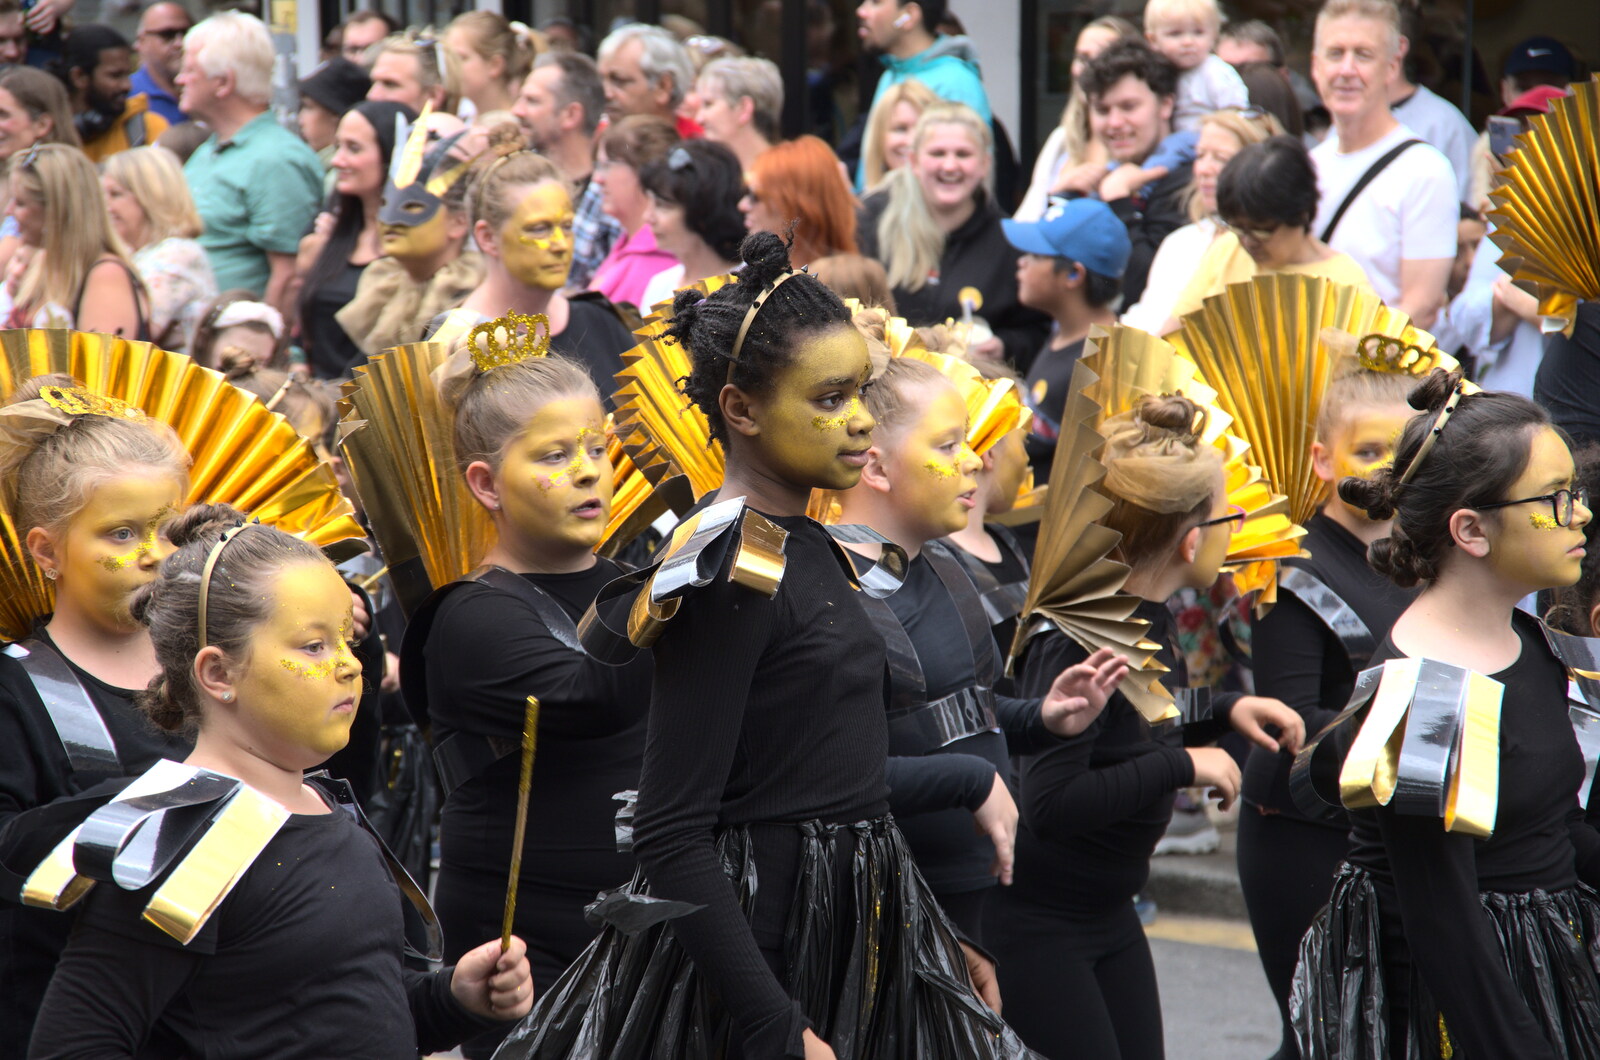 A school group with a nice black-and-gold theme from The Lord Mayor's Procession, Norwich, Norfolk - 2nd July 2022